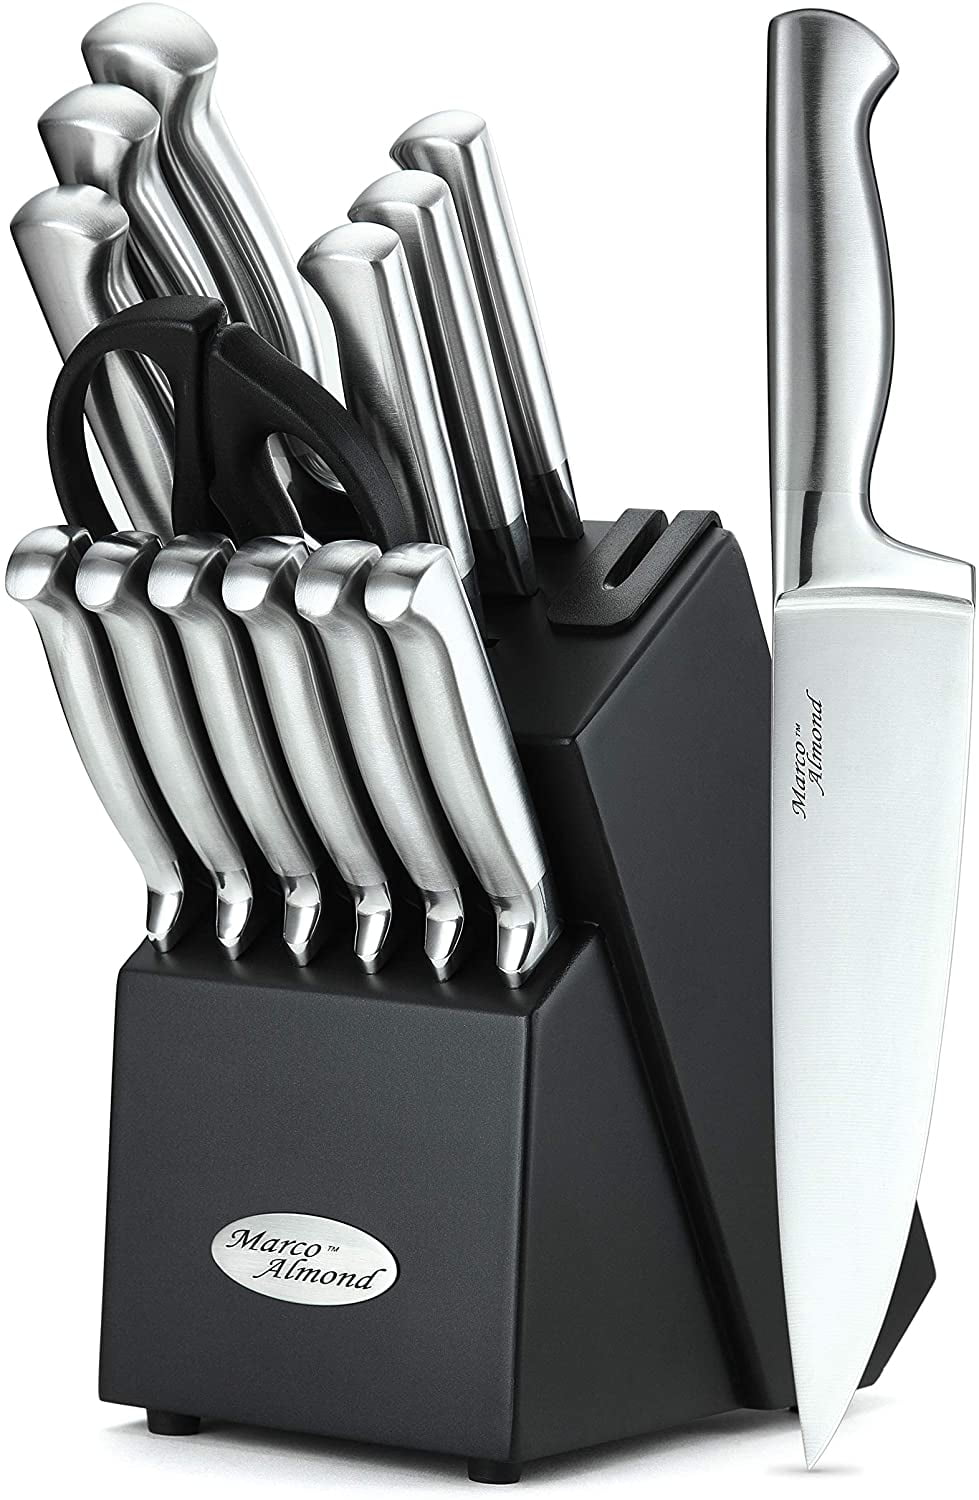 Marco Almond® Knife Set with Block KYA28, 14 Pieces Stainless Steel Chef  Cutlery Kitchen Knives Block Set with Built-in Sharpener